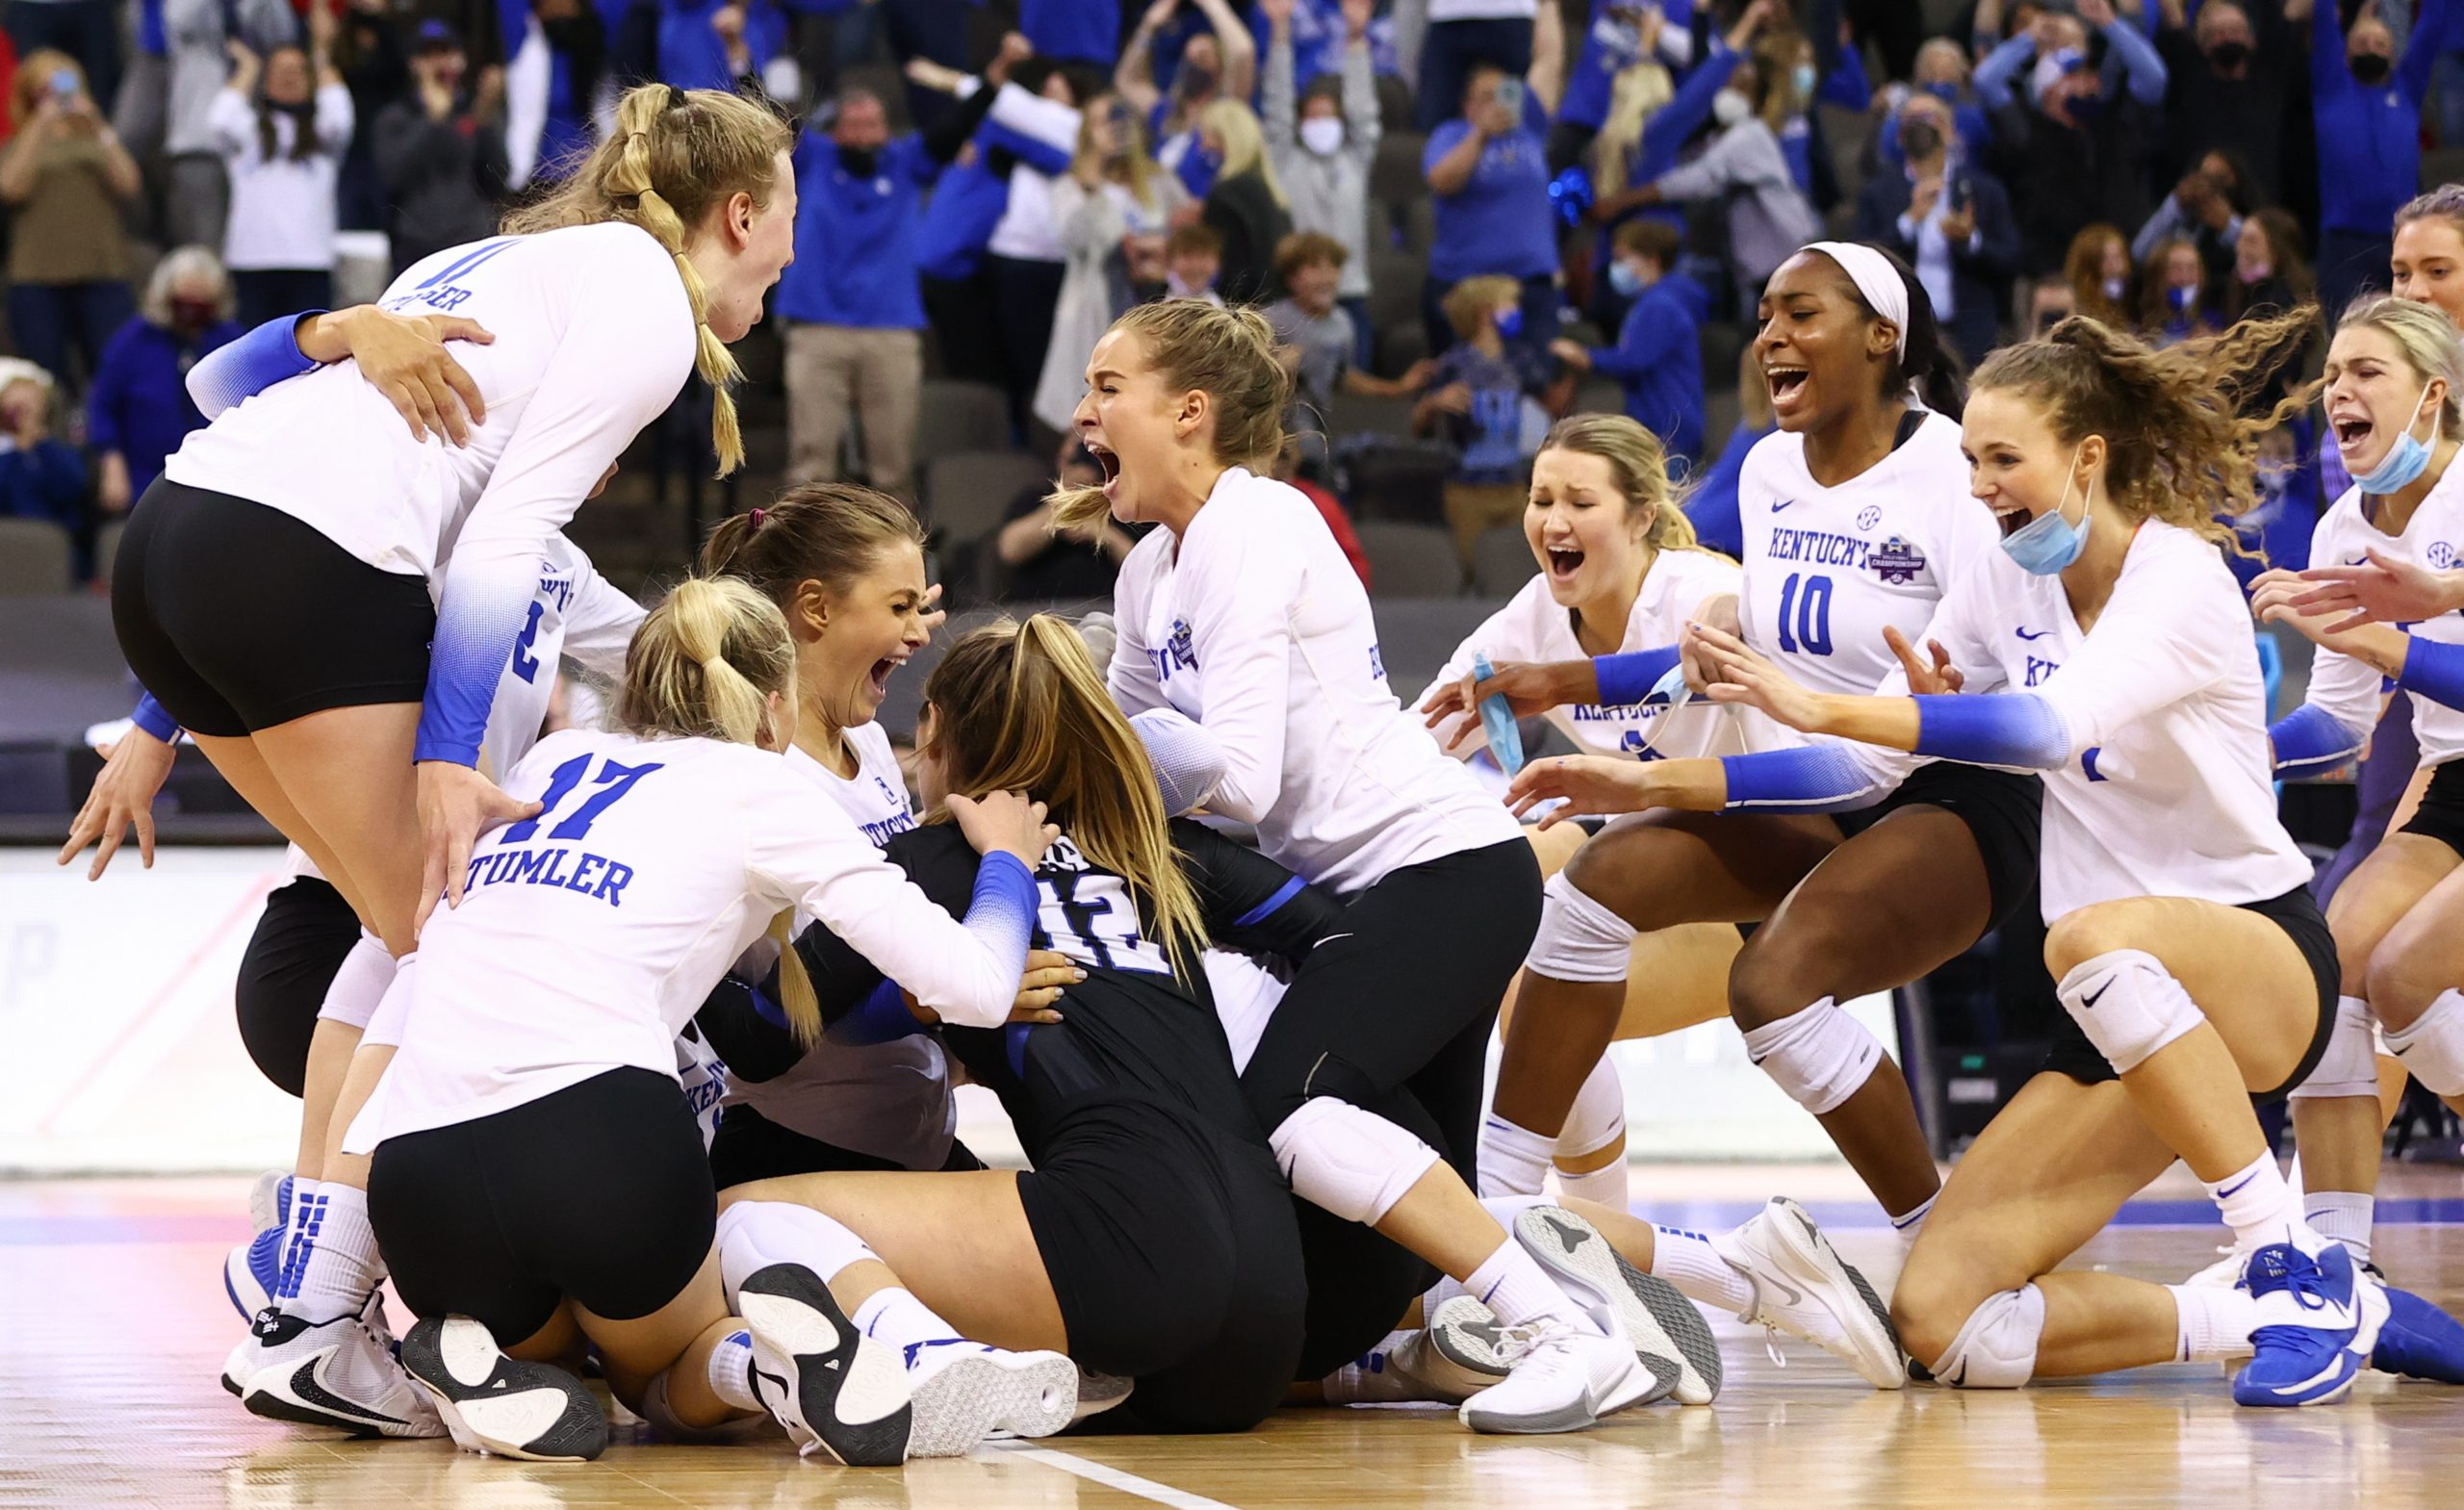 OMAHA, NE - APRIL 24: Kentucky celebrates winning against Texas during the Division I Women’s Volleyball Championship held at the Chi Health Center on April 24, 2021 in Omaha, Nebraska. (Photo by Jamie Schwaberow/NCAA Photos via Getty Images)